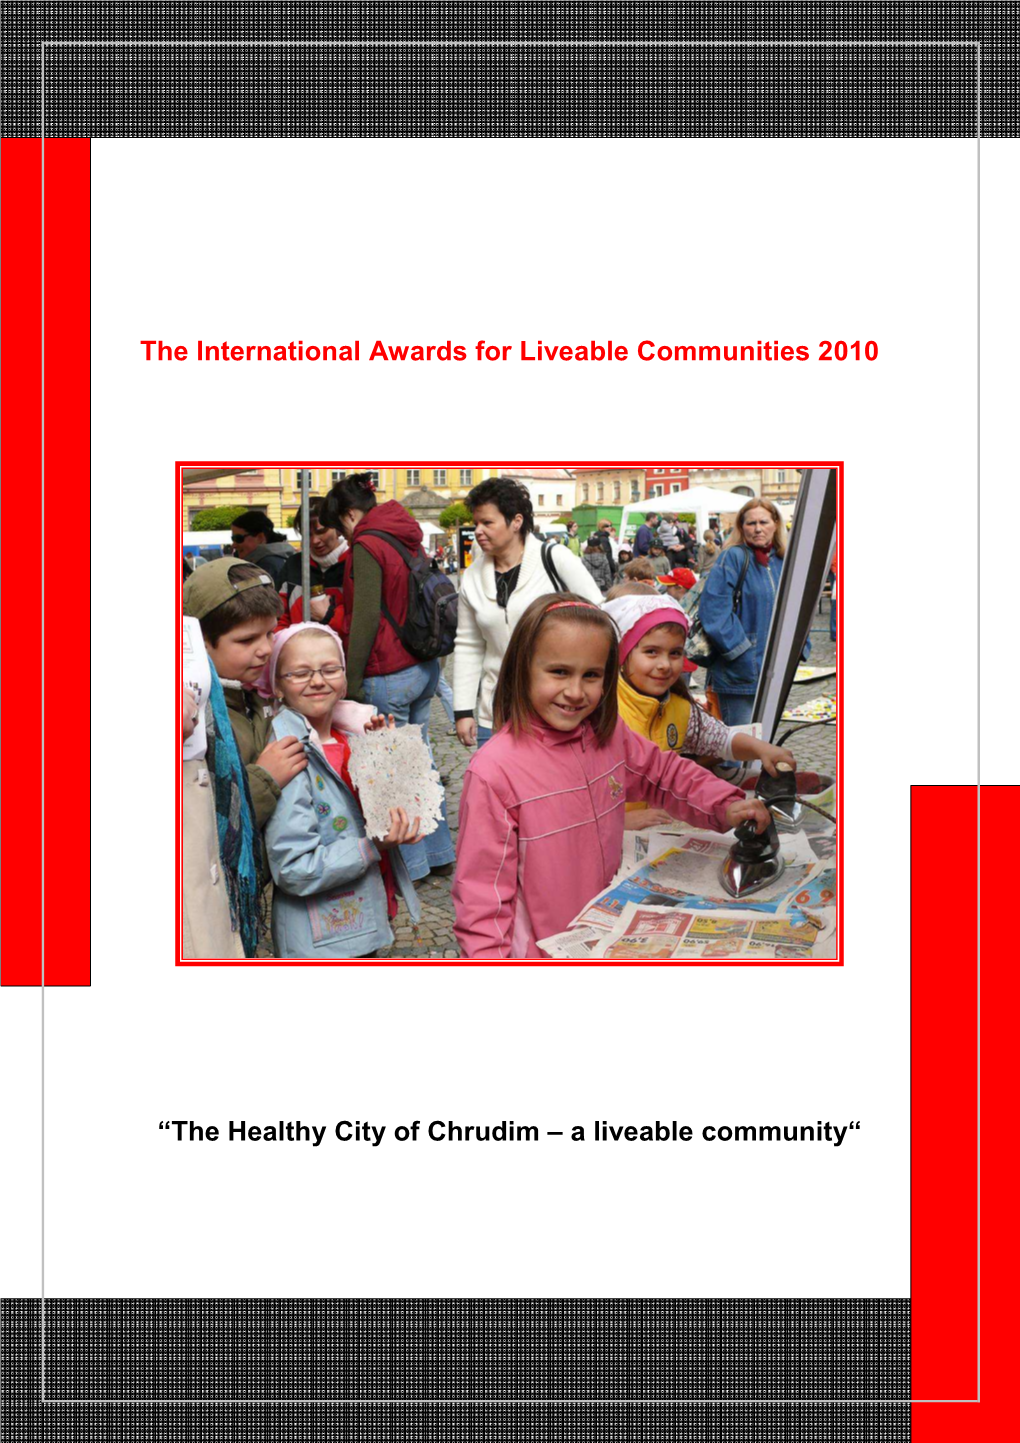 The Healthy City of Chrudim – a Liveable Community“